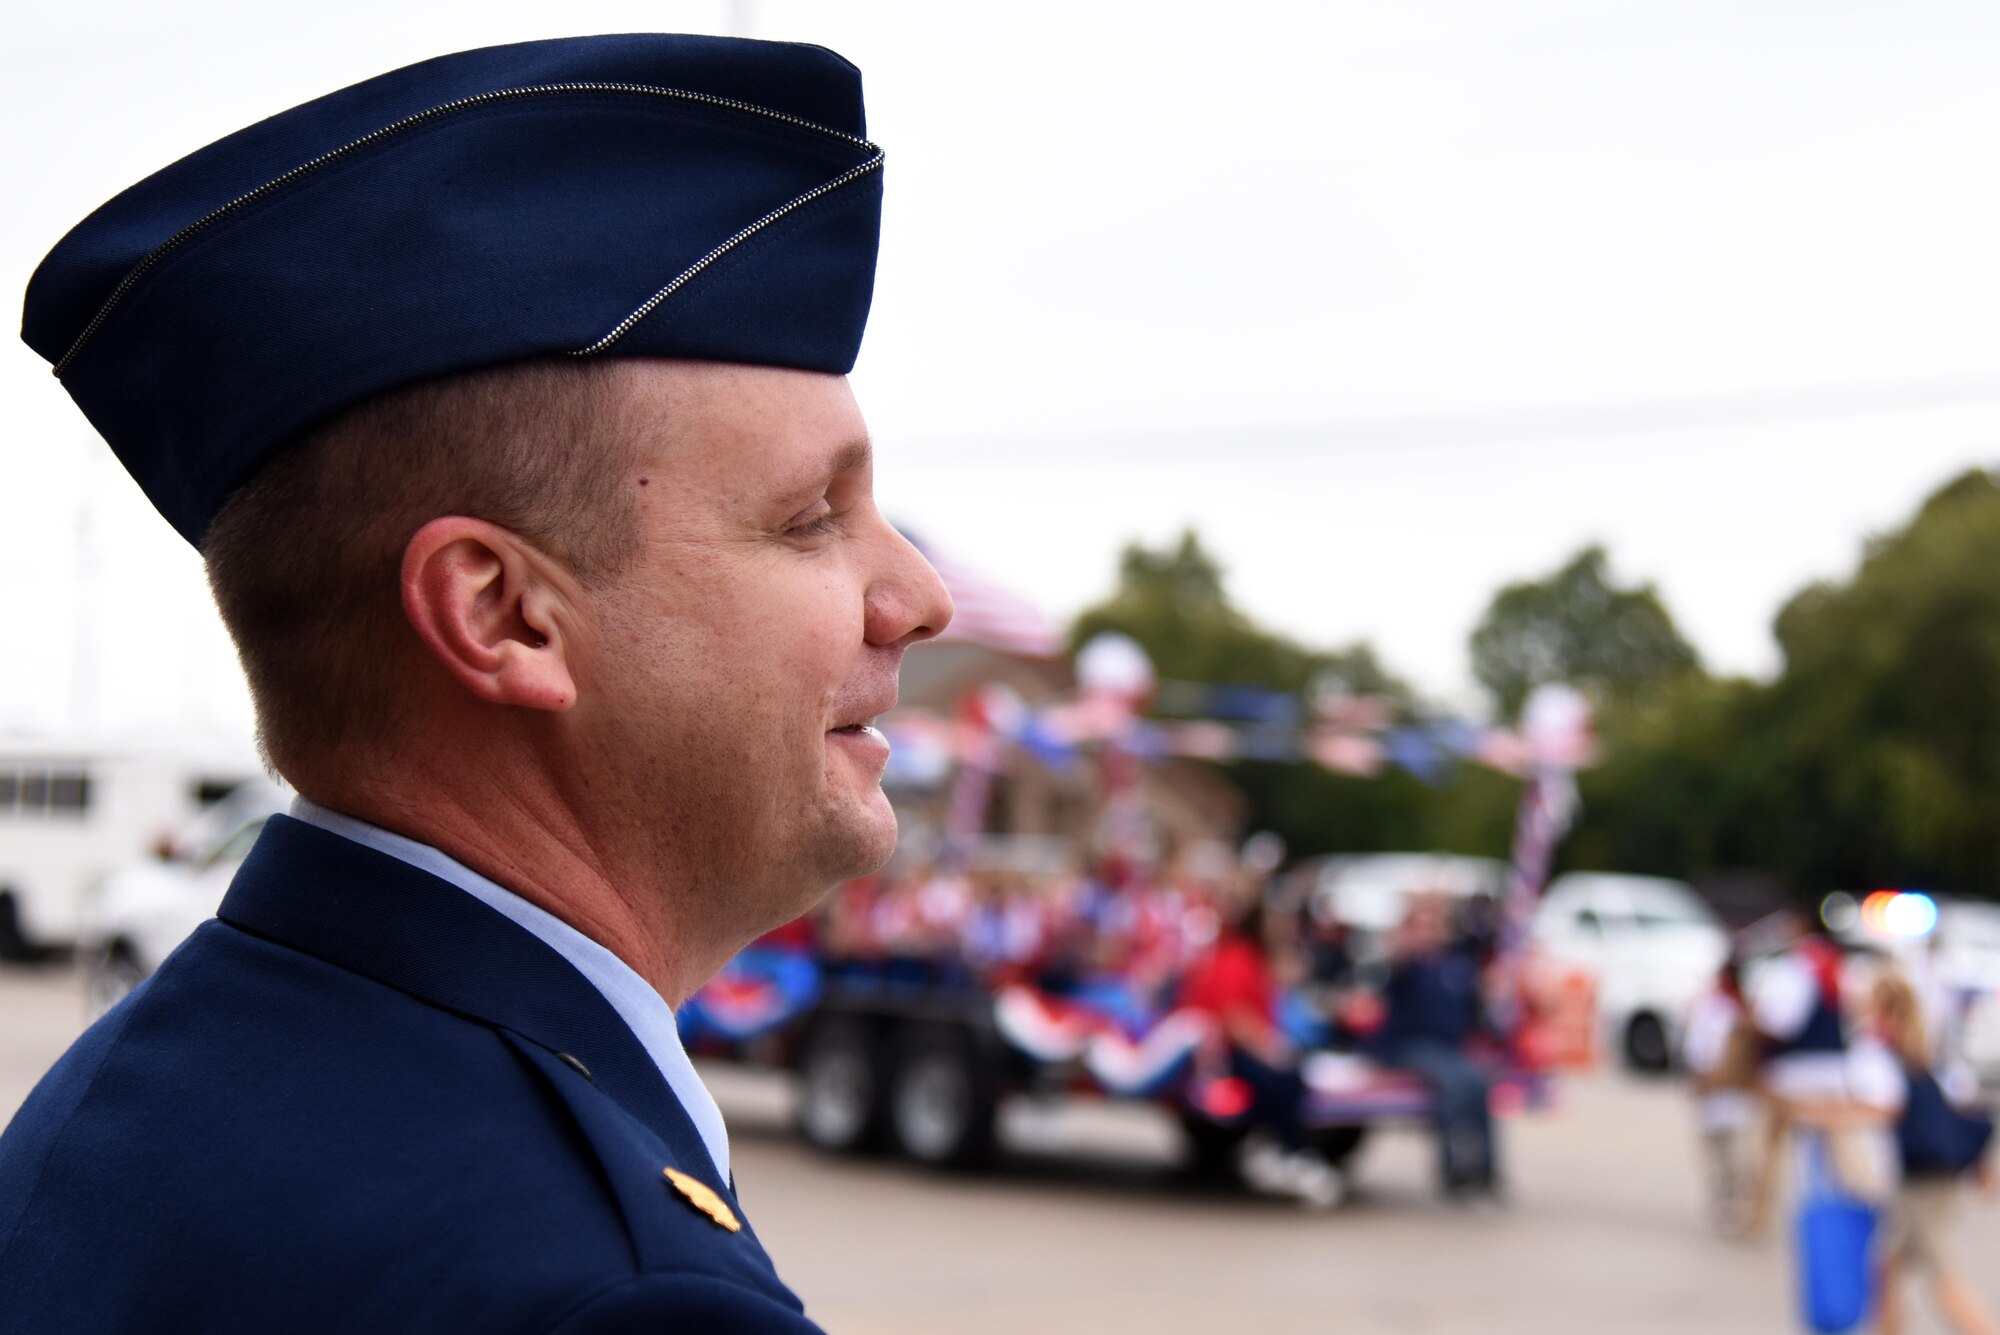 U.S. Air Force Maj. John Travieso, 17th Contracting Squadron Commander, watches the Veterans Day Parade in downtown San Angelo, Texas, Nov. 5, 2016. Travieso marched near the beginning of the parade and finished with enough time to watch the rest. (U.S. Air Force photo by Senior Airman Joshua Edwards/Released)